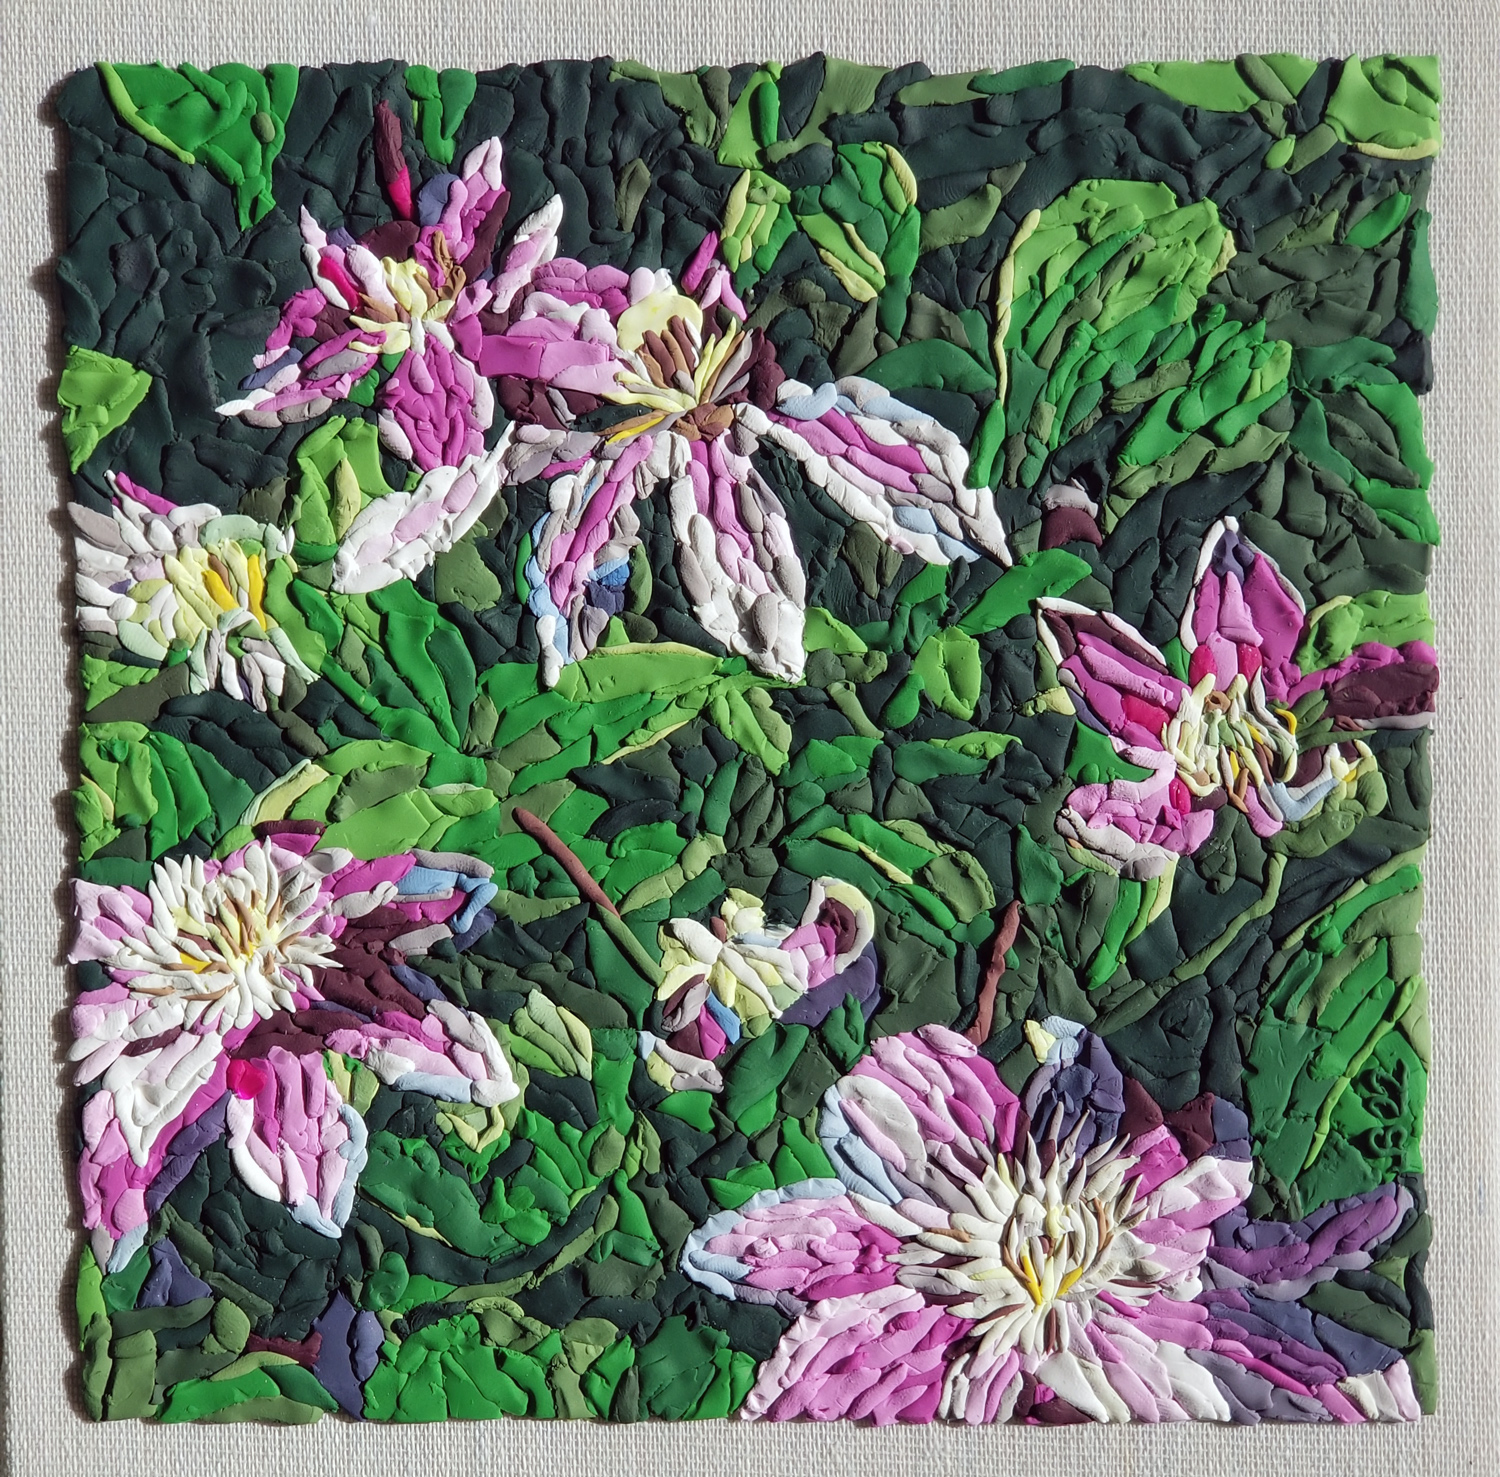 Clematis
Polymer clay on linen
9″ x 9″
$400